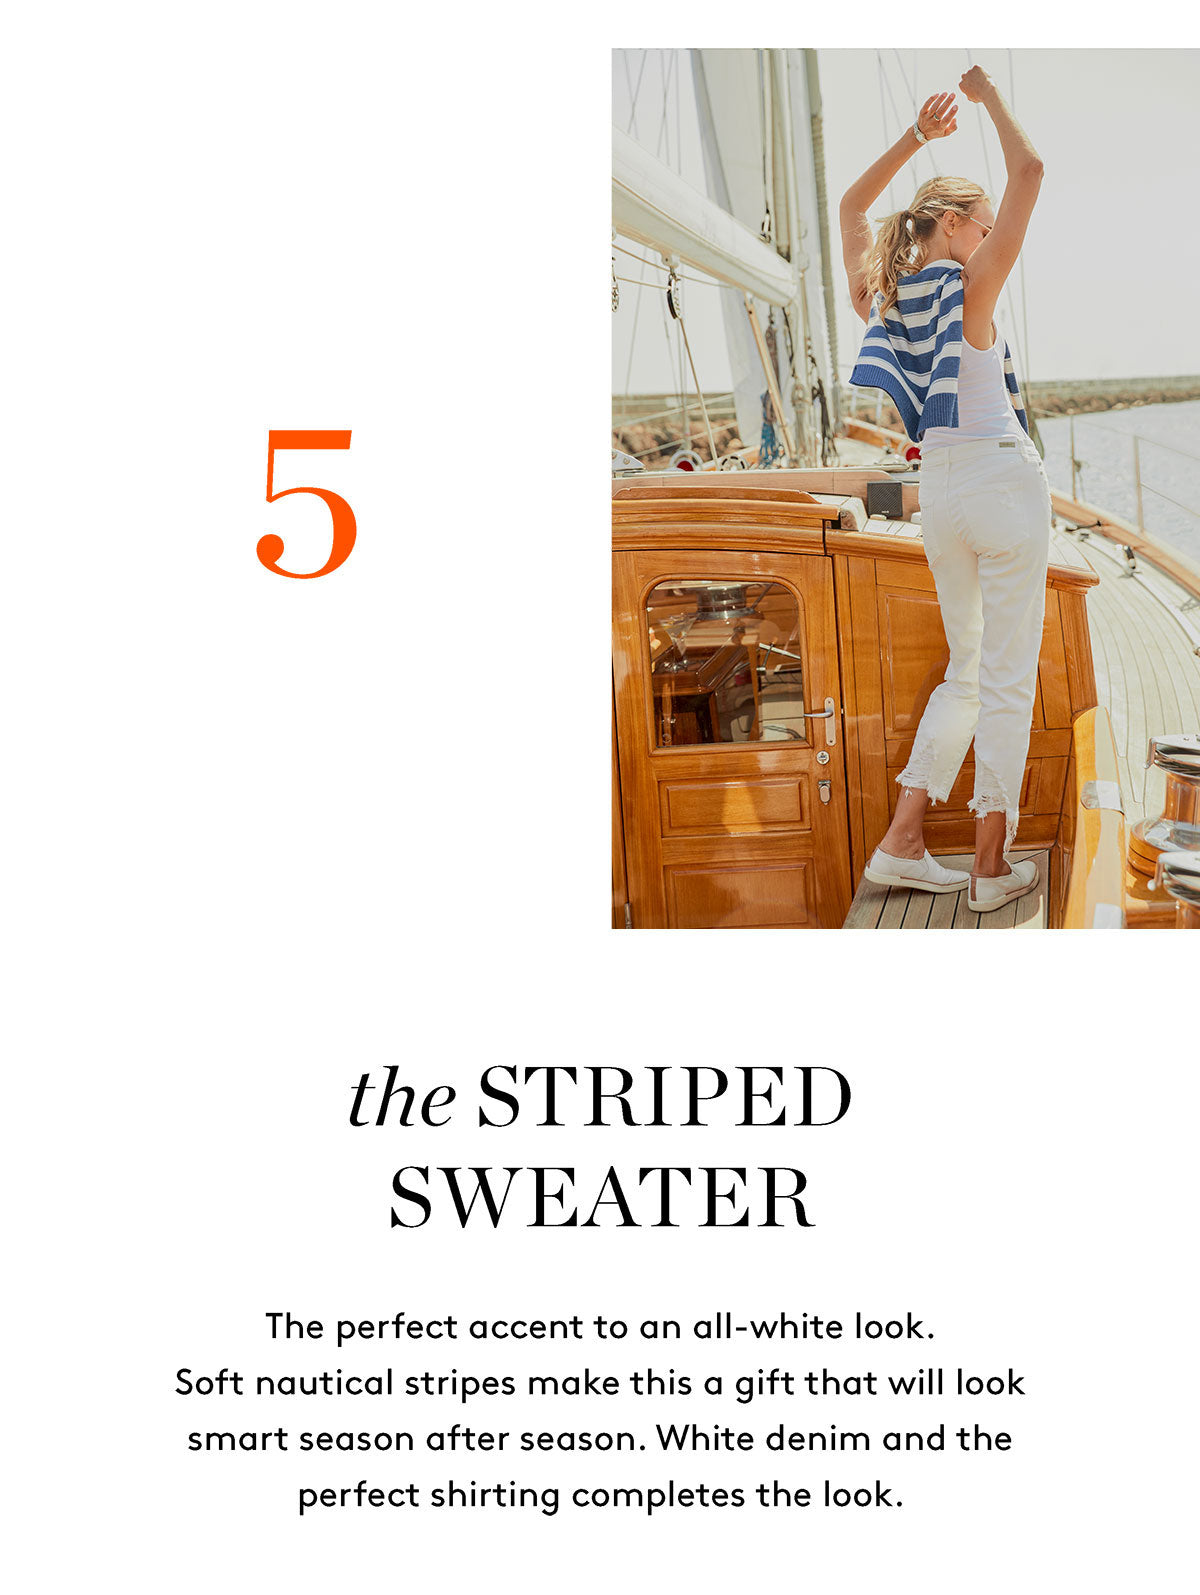 the STRIPED SWEATER The perfect accent to an all-white look. Soft nautical stripes make this a gift that will look smart season after season. White denim and the perfect shirting completes the look.